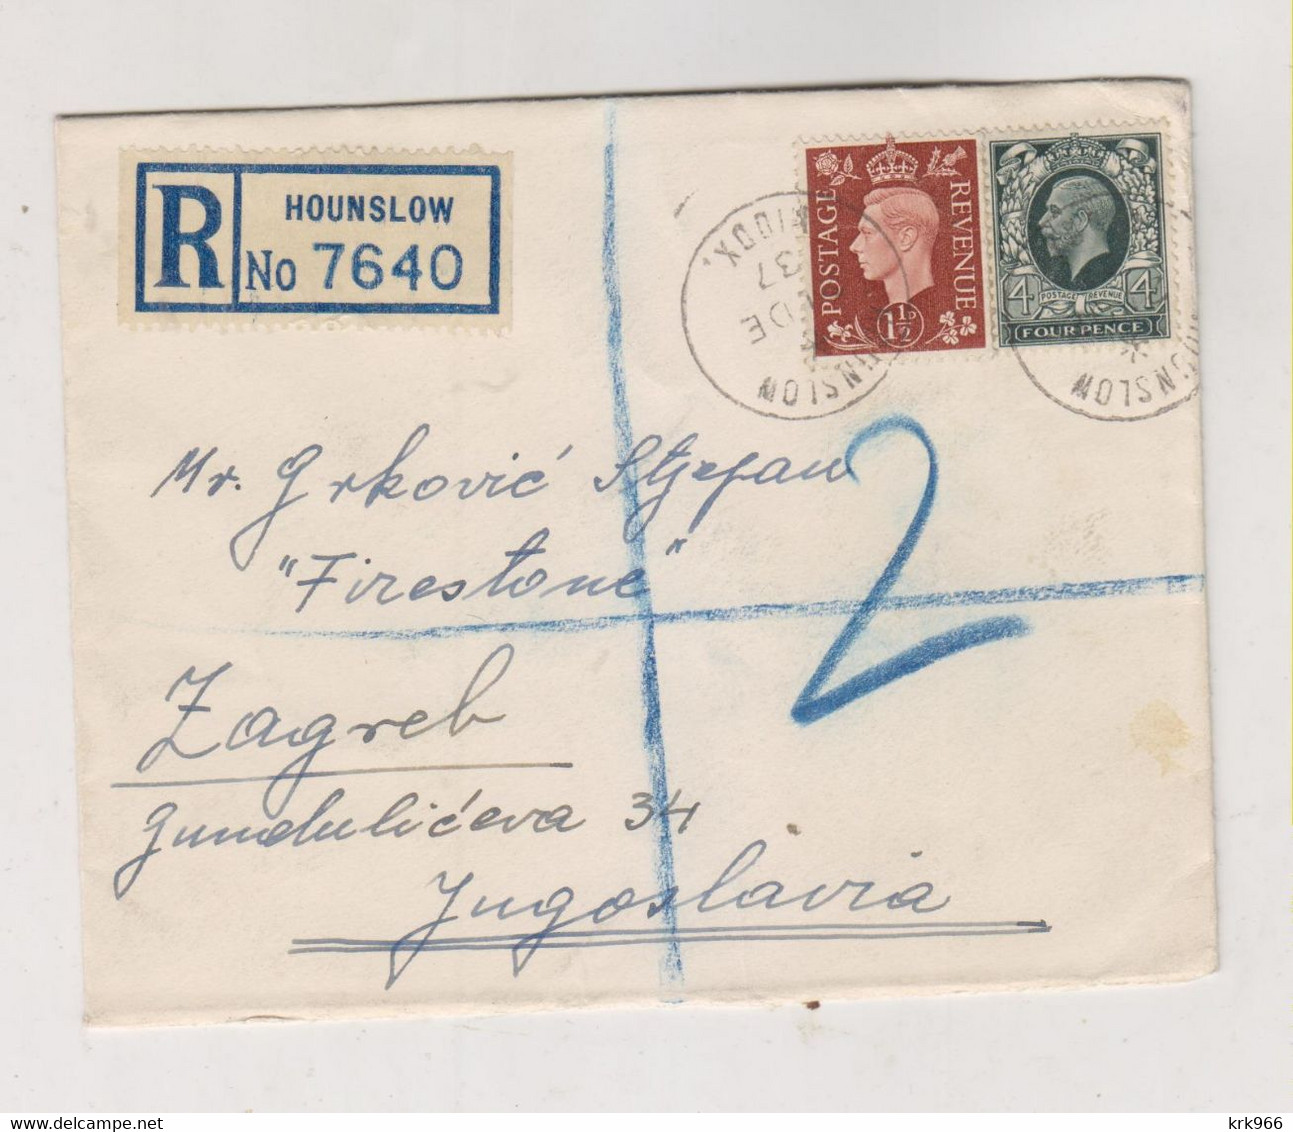 GREAT BRITAIN 1937 HOUNSLOW Registered Cover To Yugoslavia - Covers & Documents